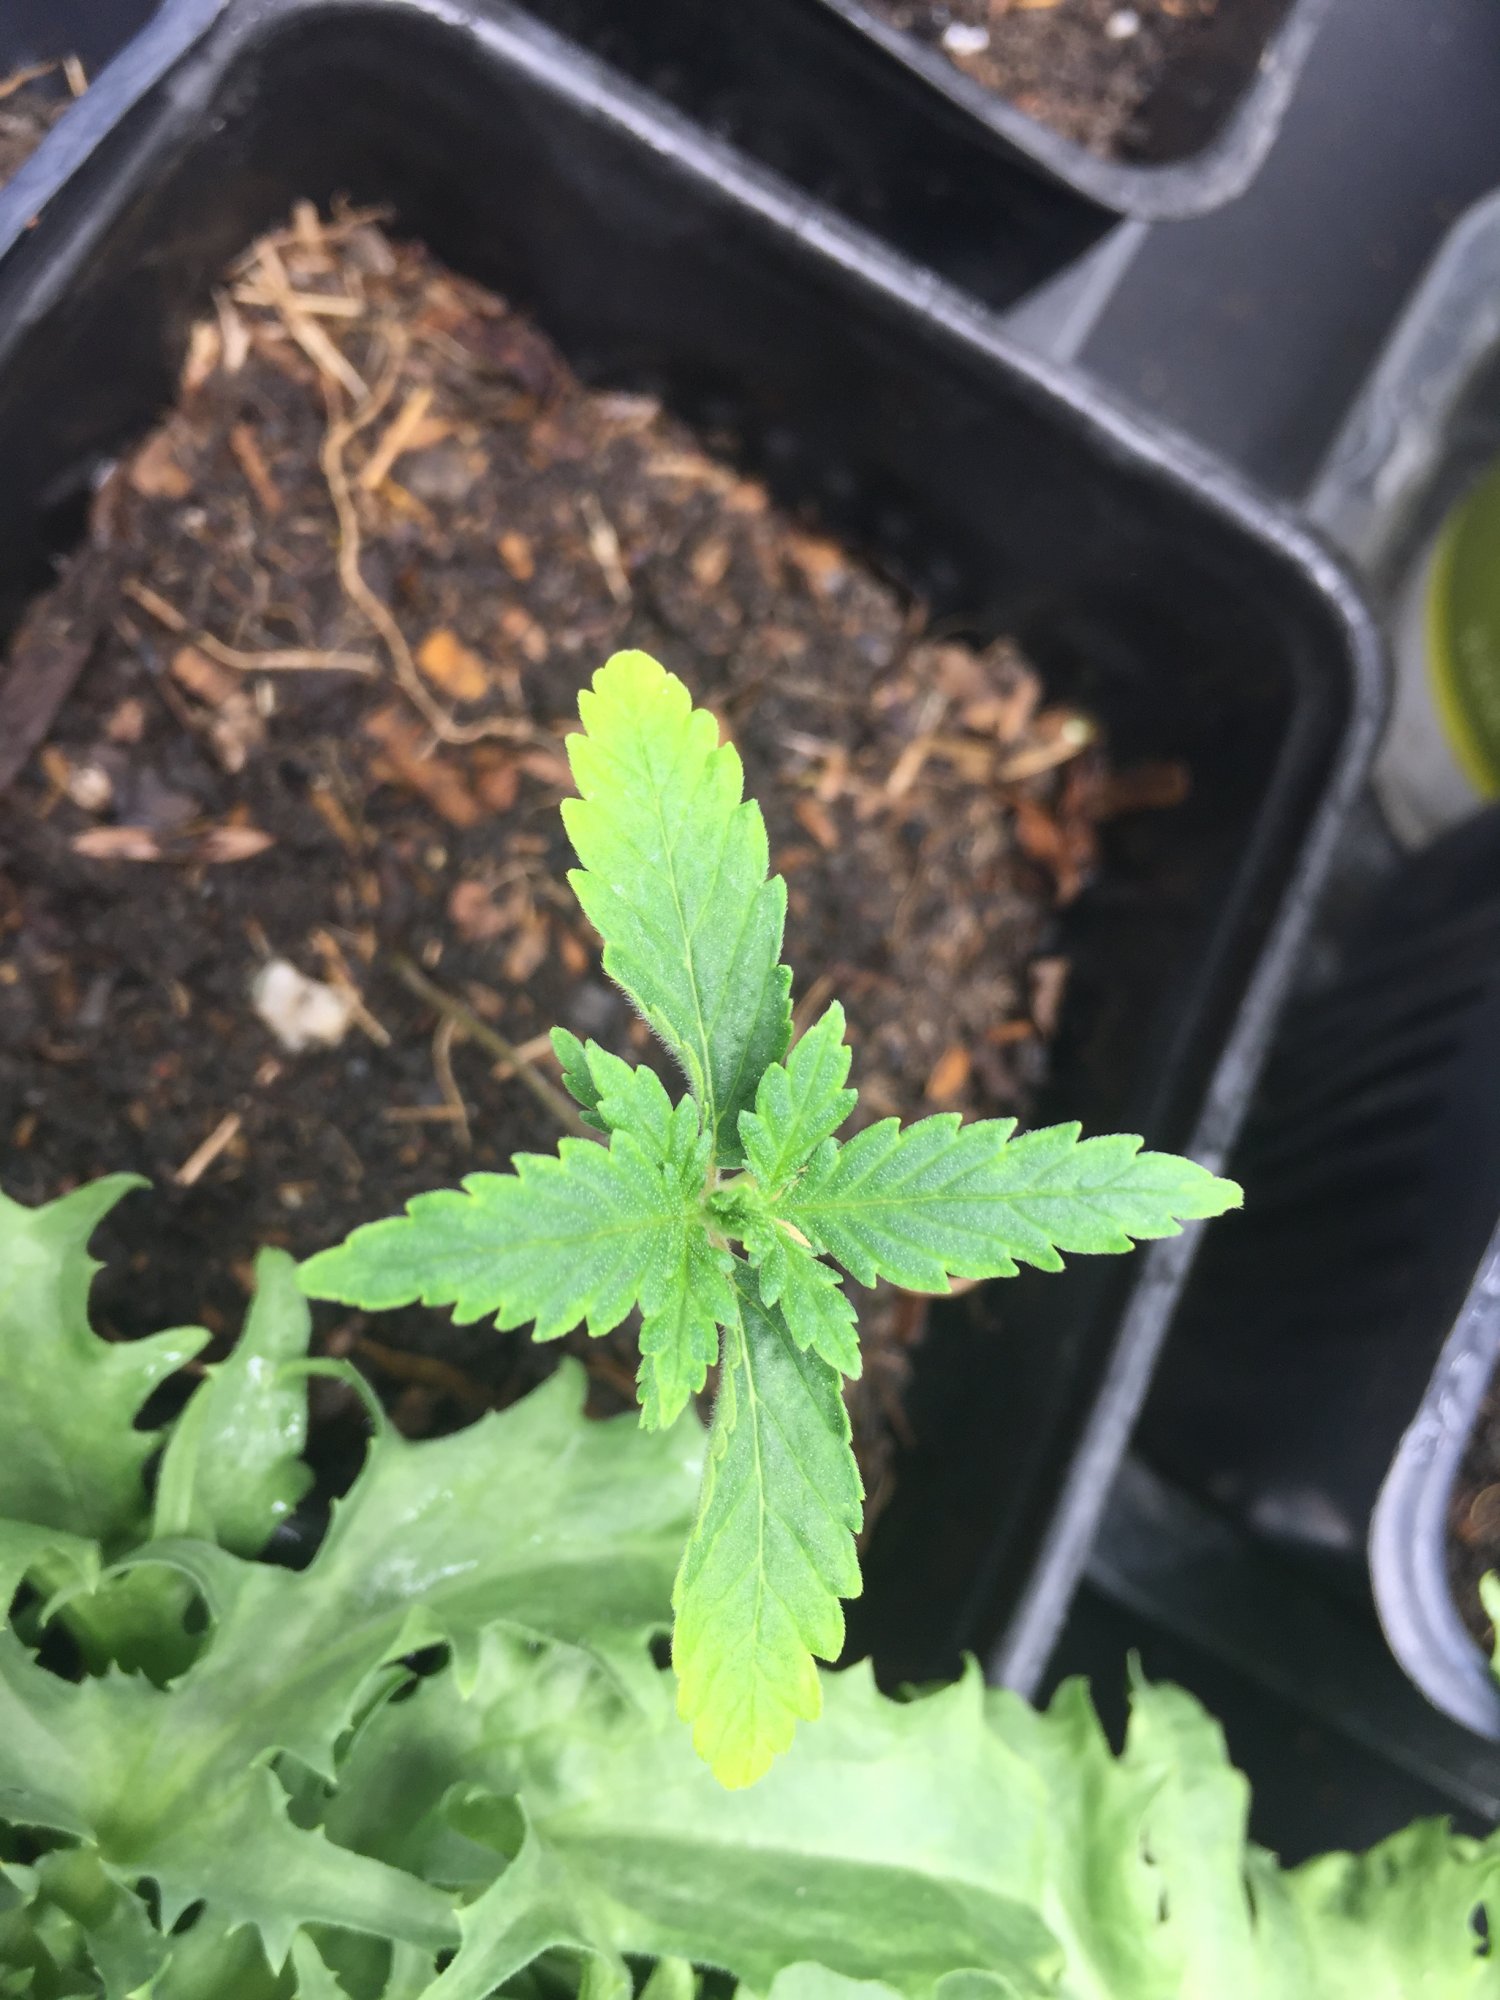 Some seedlings yellowing and or drooping 3